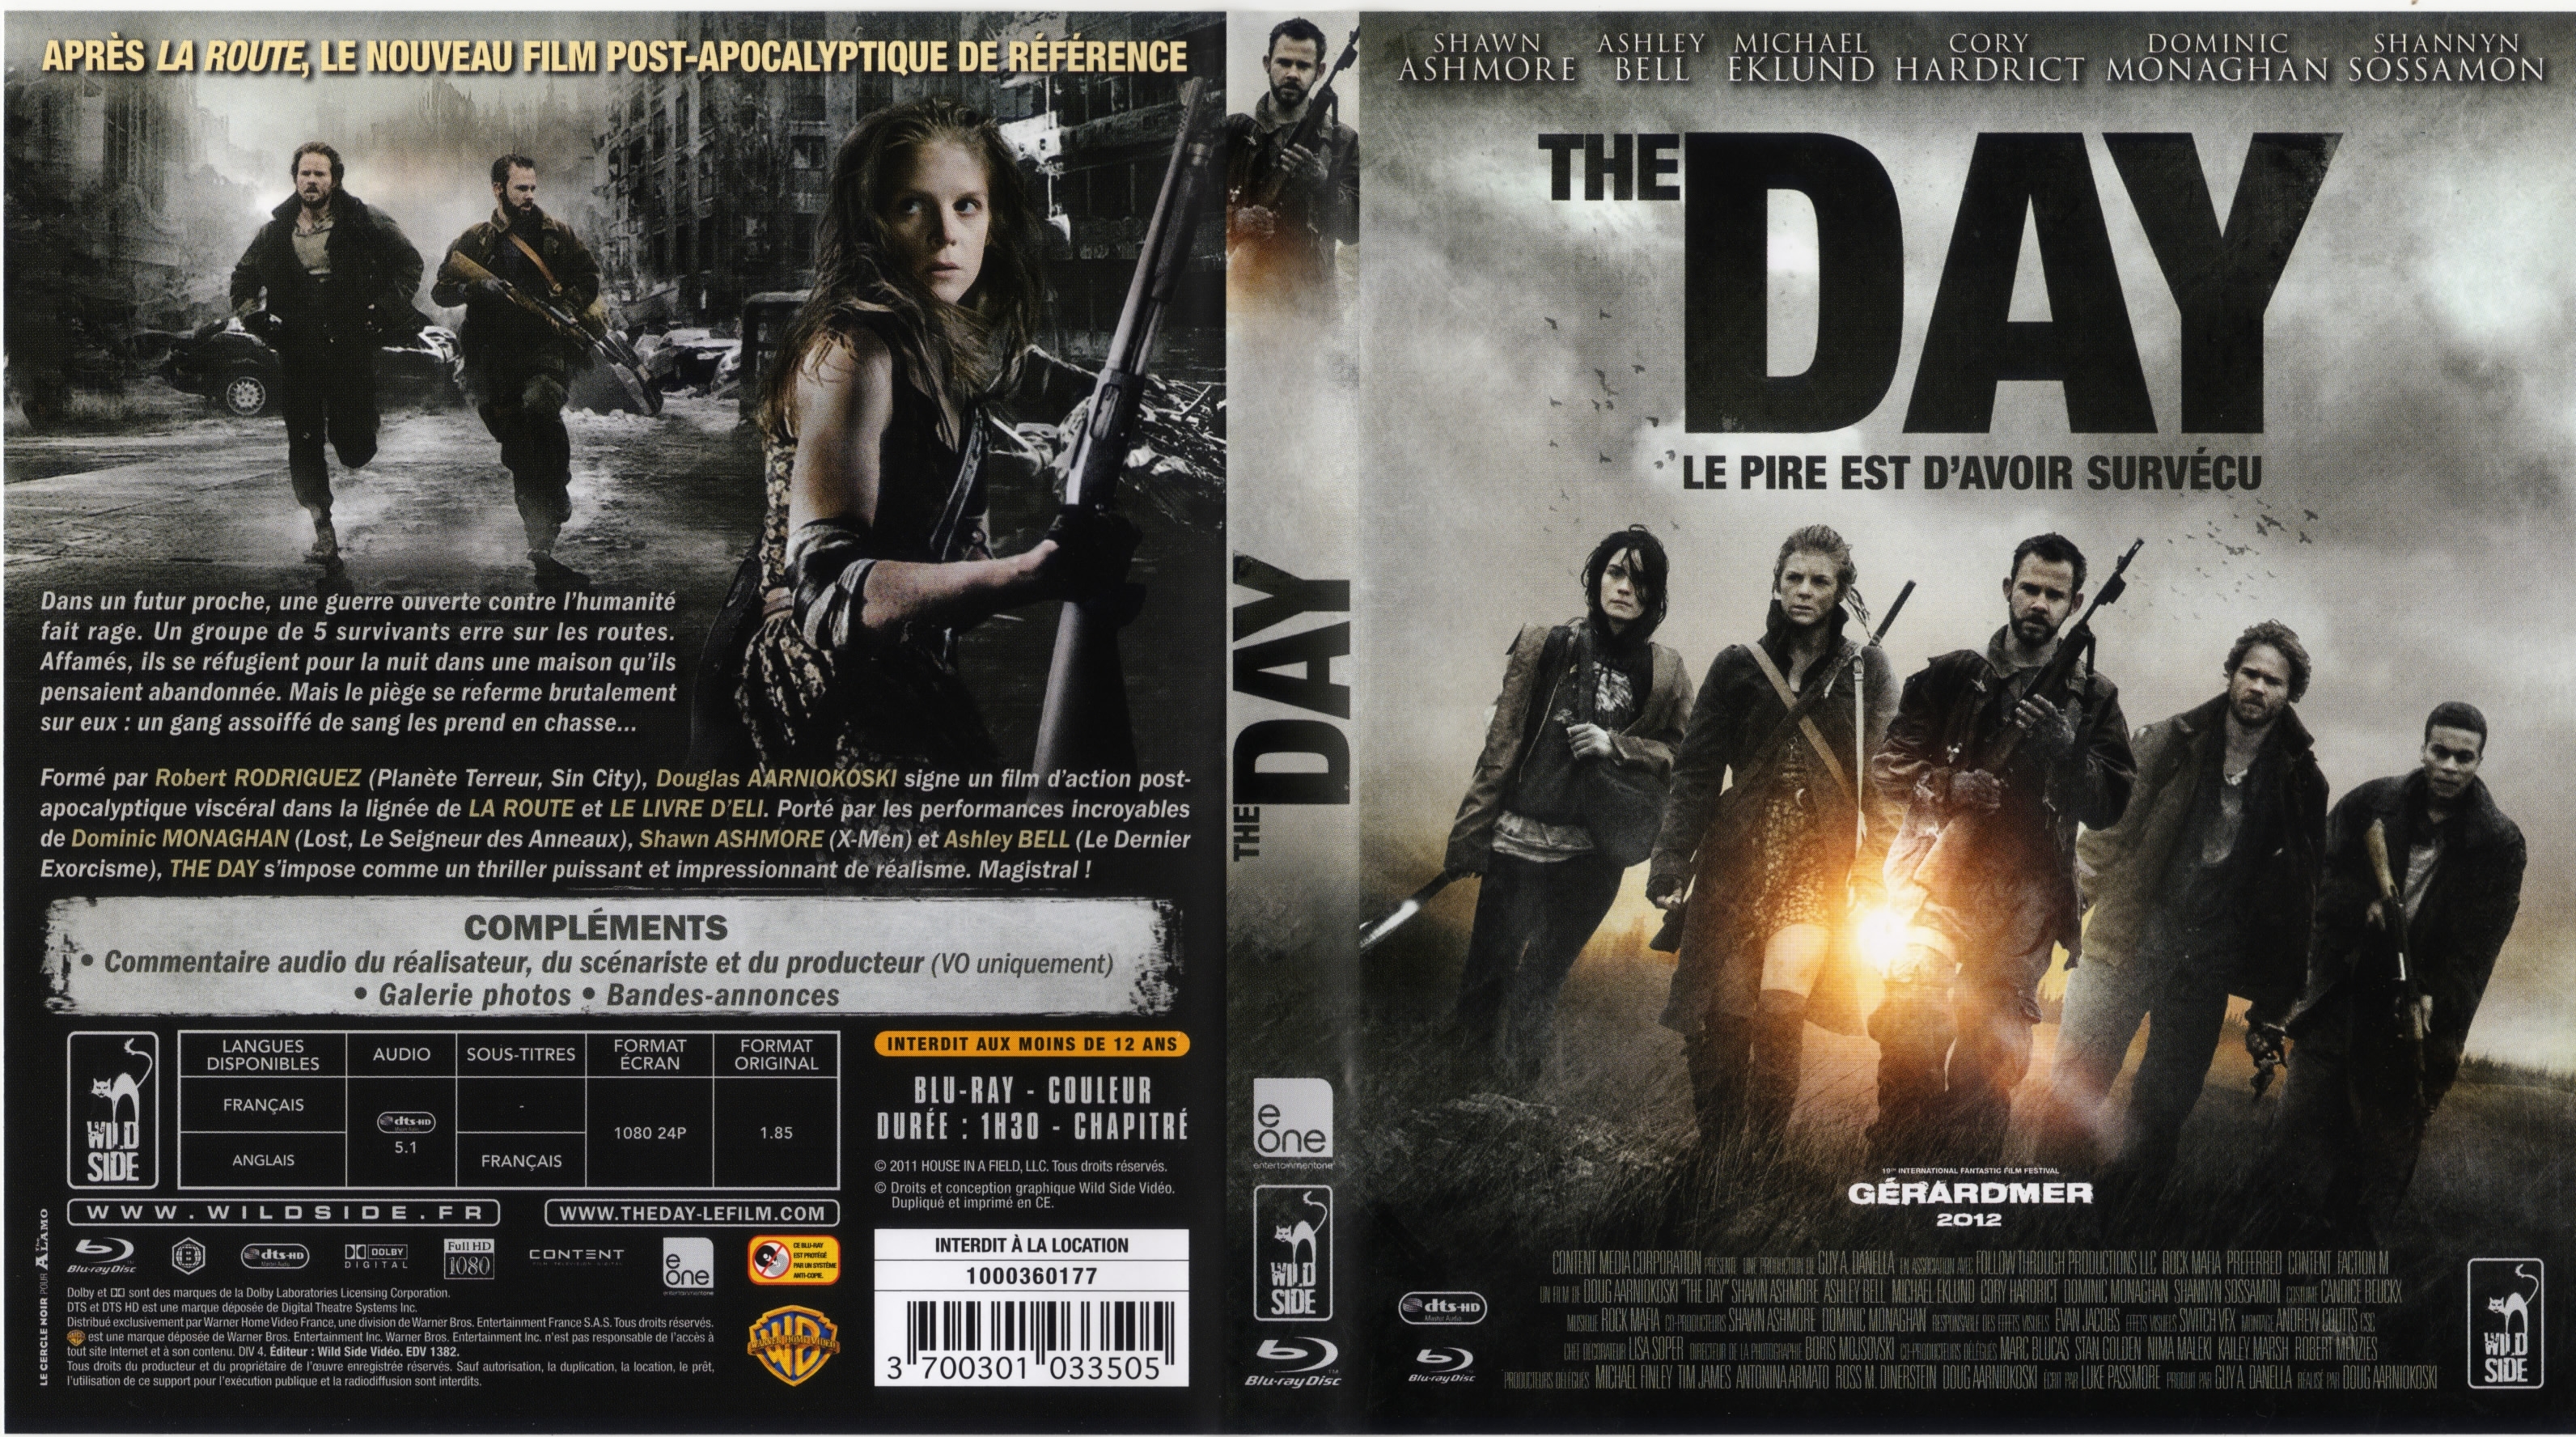 Jaquette DVD The Day (BLU-RAY)